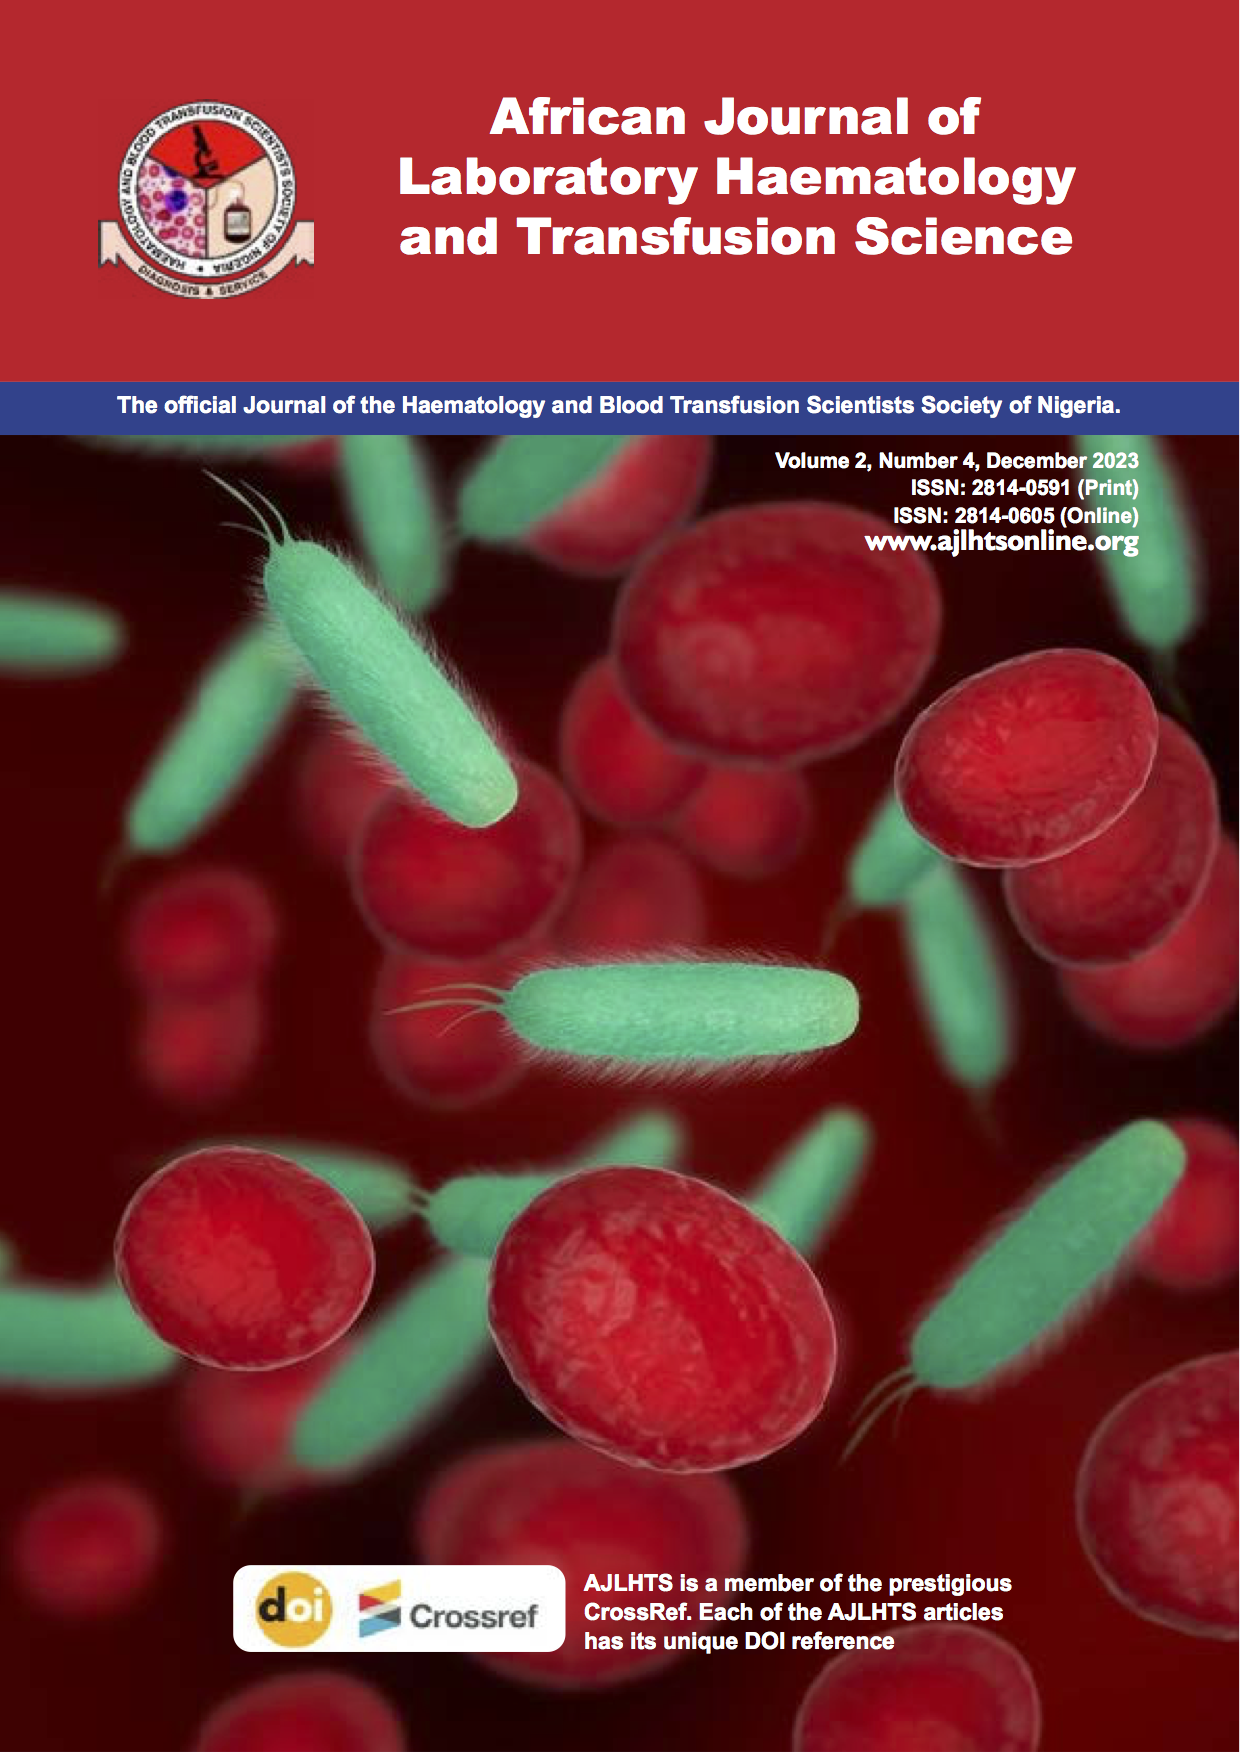 African Journal of Laboratory Haematology and Transfusion Science